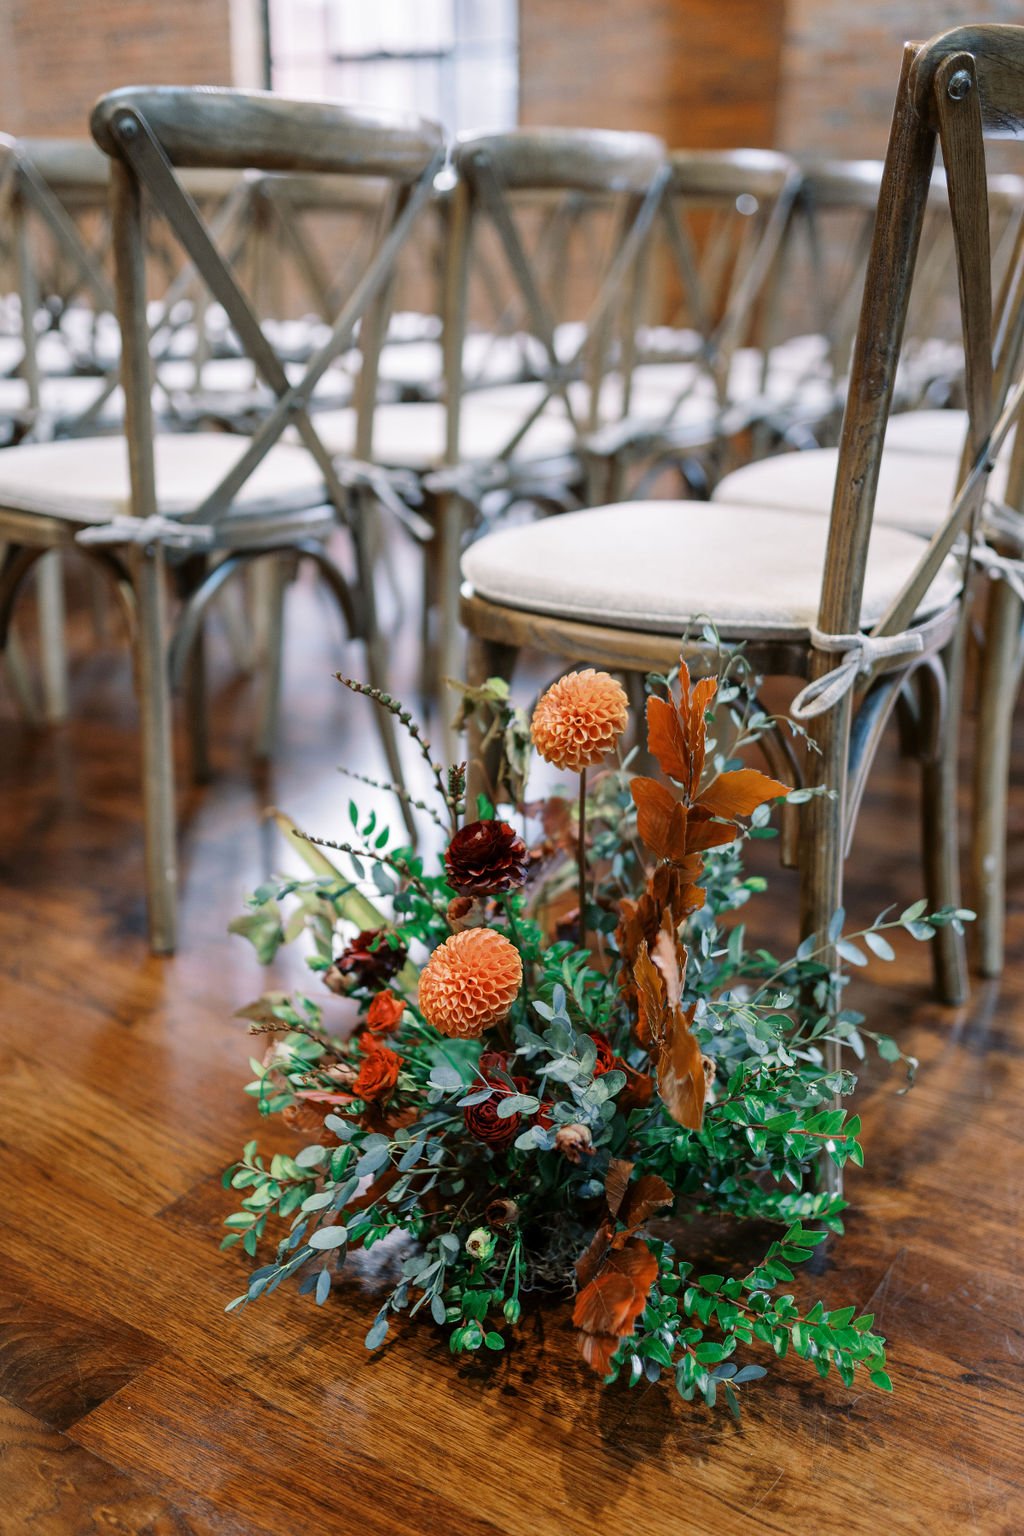 Organic ceremony aisle markers accompanied the installations with pops of burgundy, burnt orange, terra cotta, cream and fall foliage. Florals include garden roses, ranunculus, and dahlias. Floral Design by Rosemary and Finch in Nashville, TN.